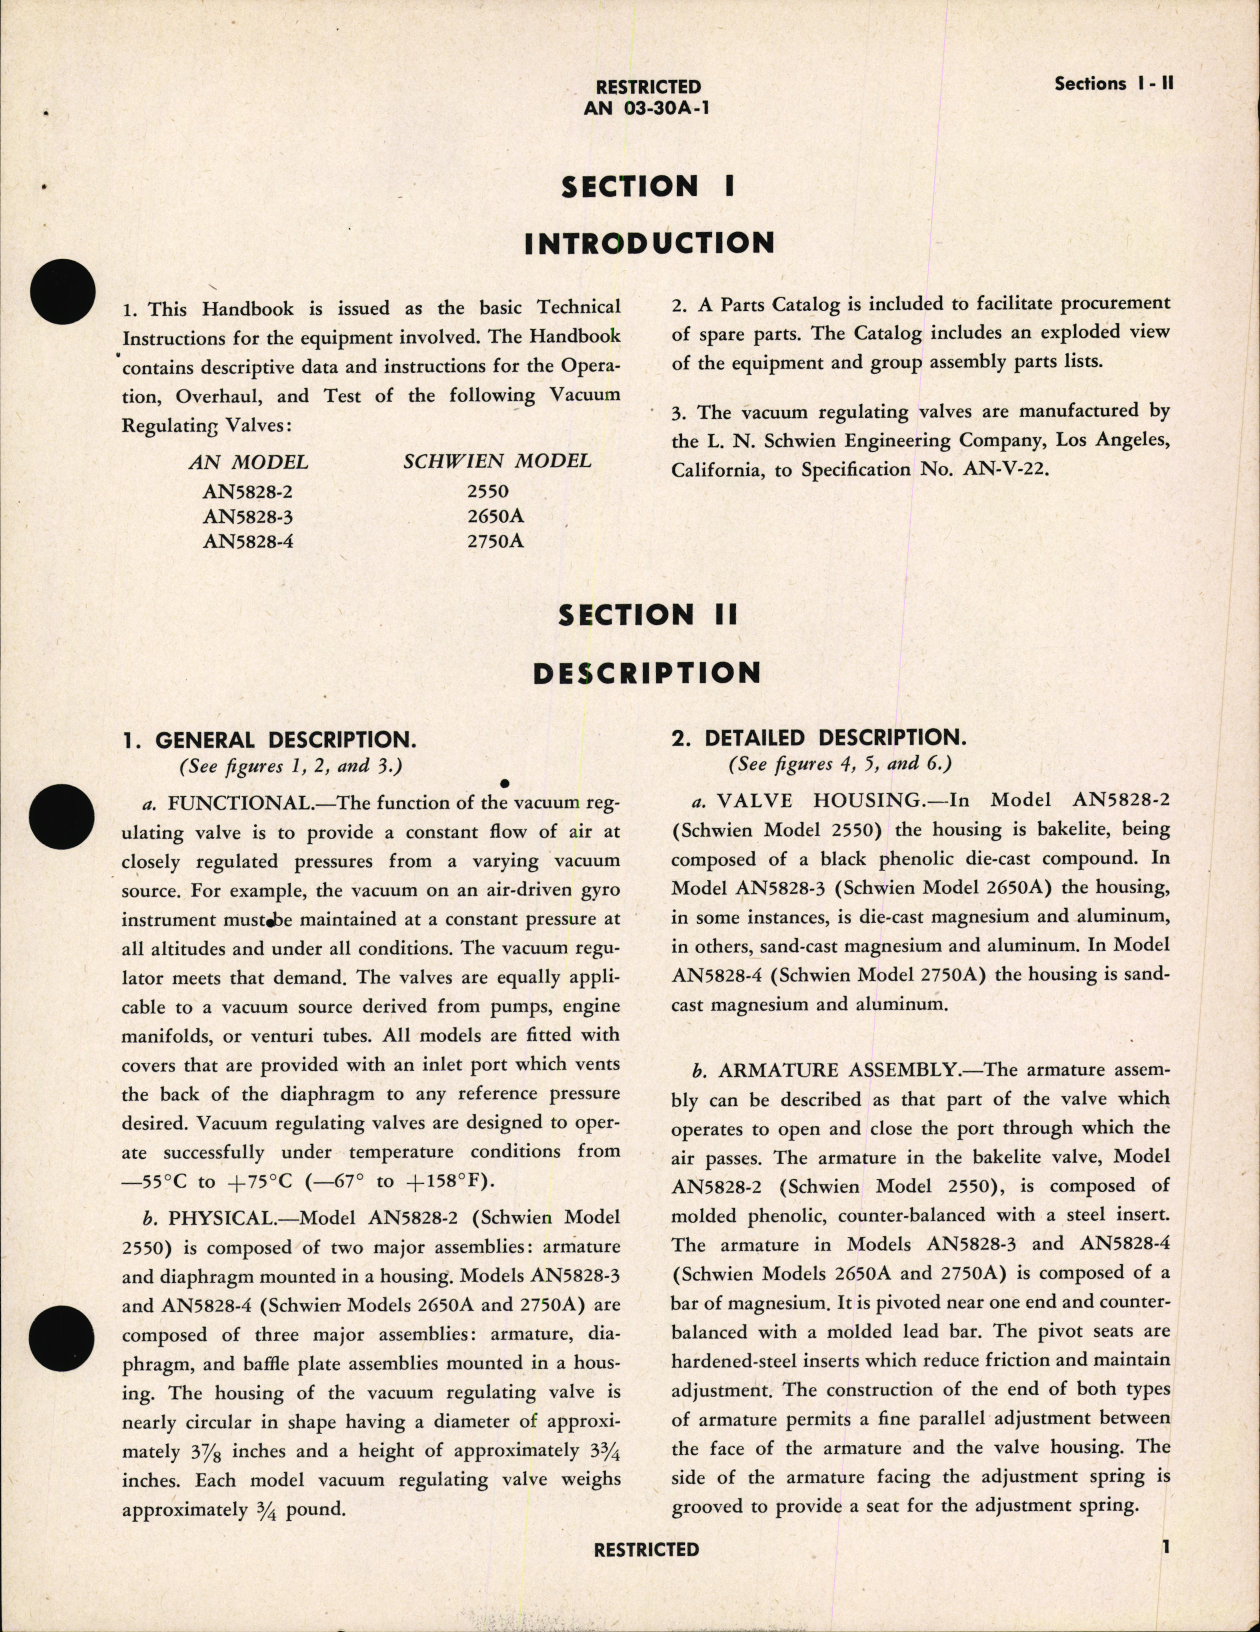 Sample page 5 from AirCorps Library document: Handbook of Instructions with Parts Catalog for Vacuum Regulating Valves